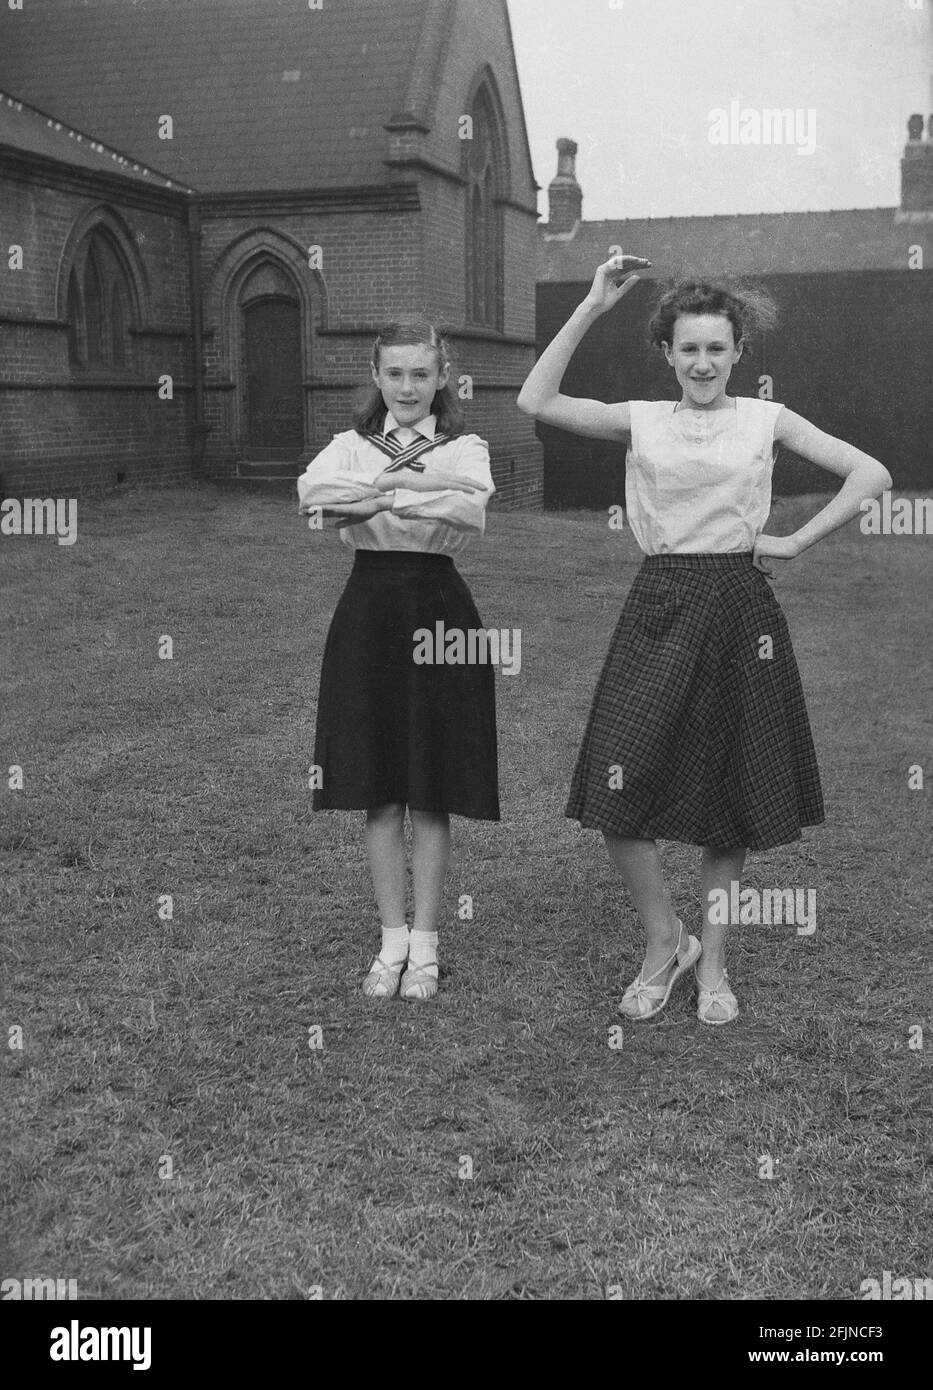 1956, historical, outside in the grounds of church, two teenage girls showing off dance moves they will perform in the May Day carnival, Leds, England, UK. An ancient festival celebrating the arrival of Spring, May Day involved the crowning of a May Queen and dancing around a Maypole, activities that have taken place in England for centuries. Selected from the girls of the area, The May Queen would start the procession of floats and dancing. In the industrialised North of England, the Church Sunday Schools often led the organisation of the carnival. Stock Photo